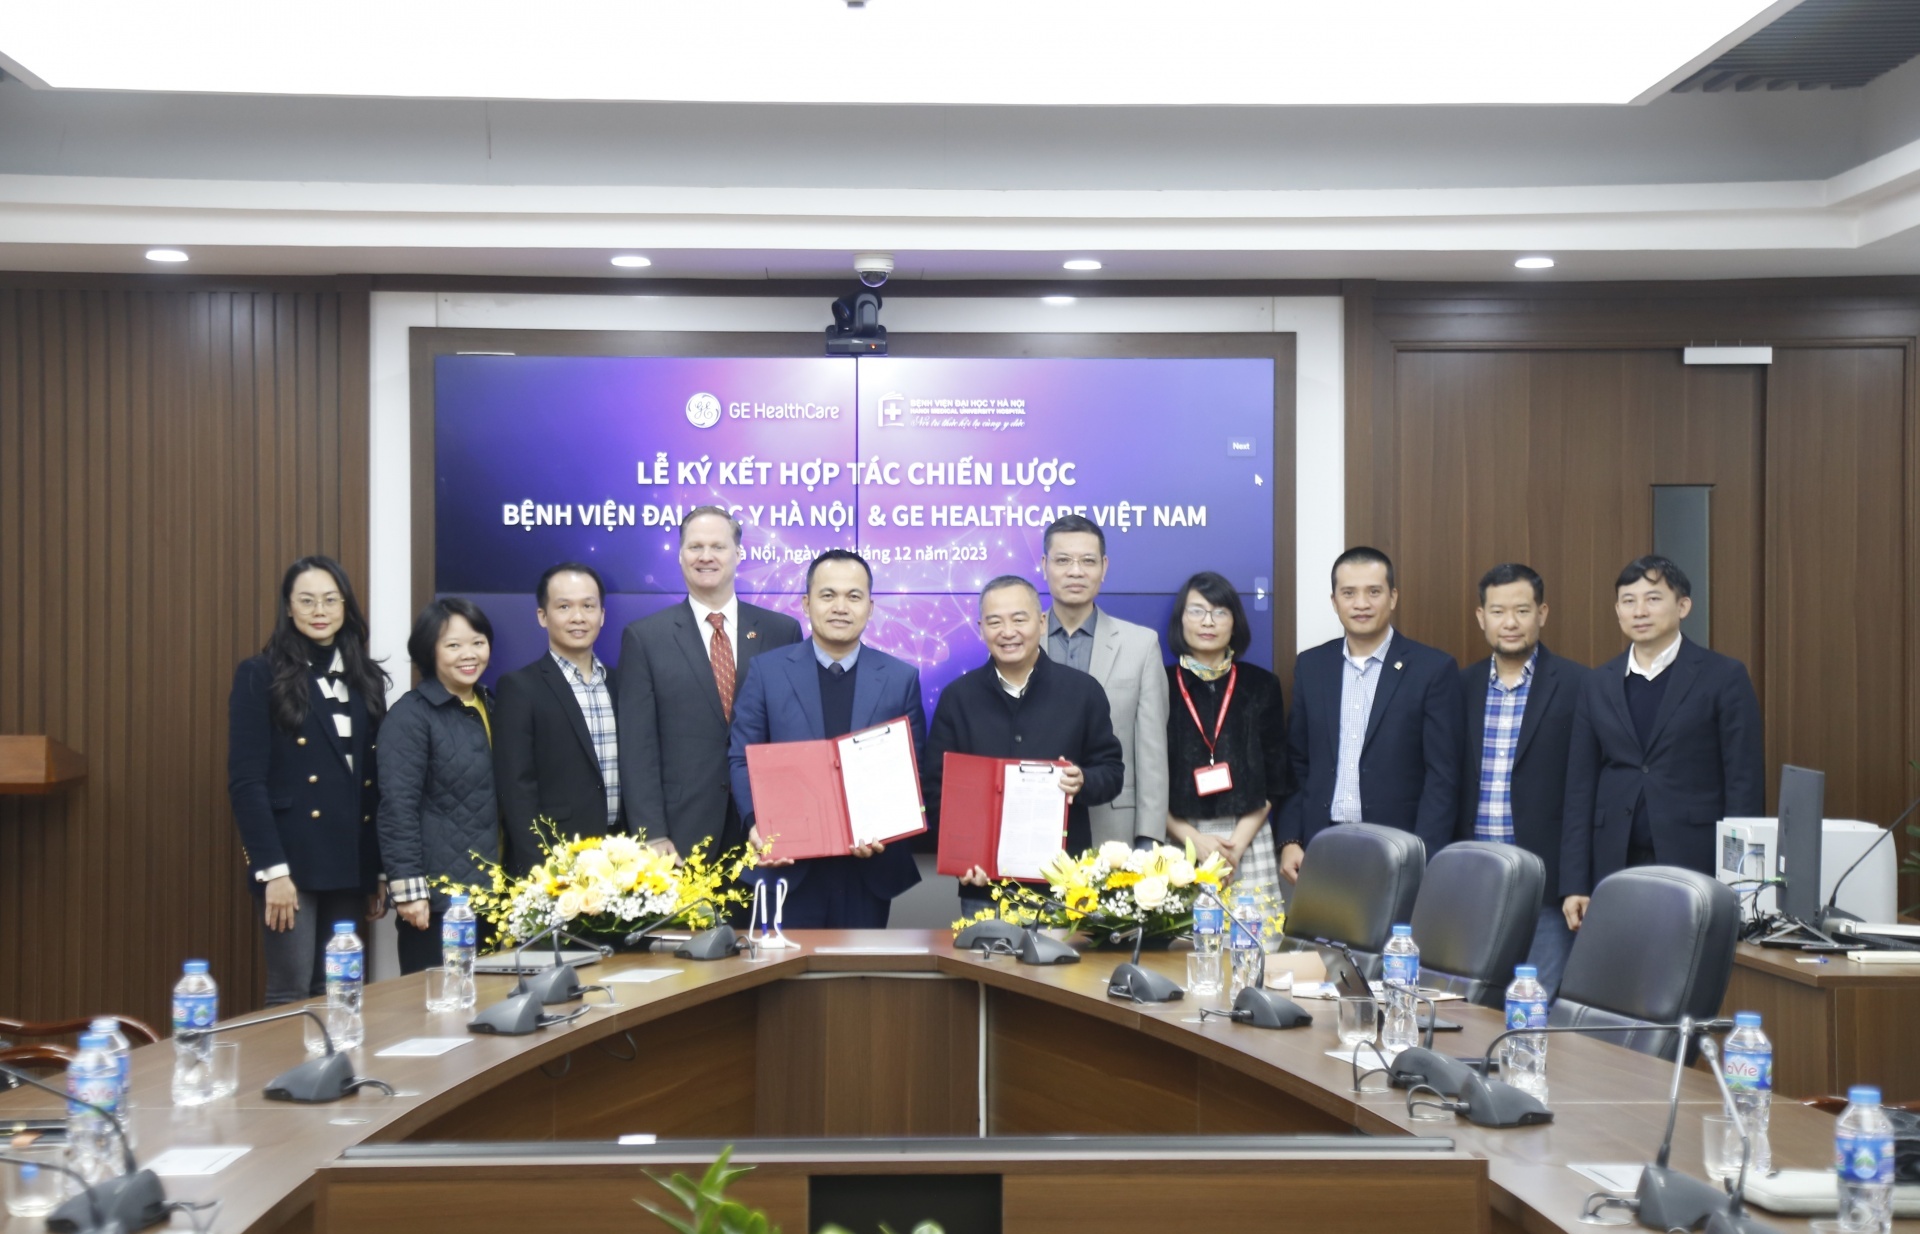 Hanoi Medical University Hospital and GE HealthCare sign MoU